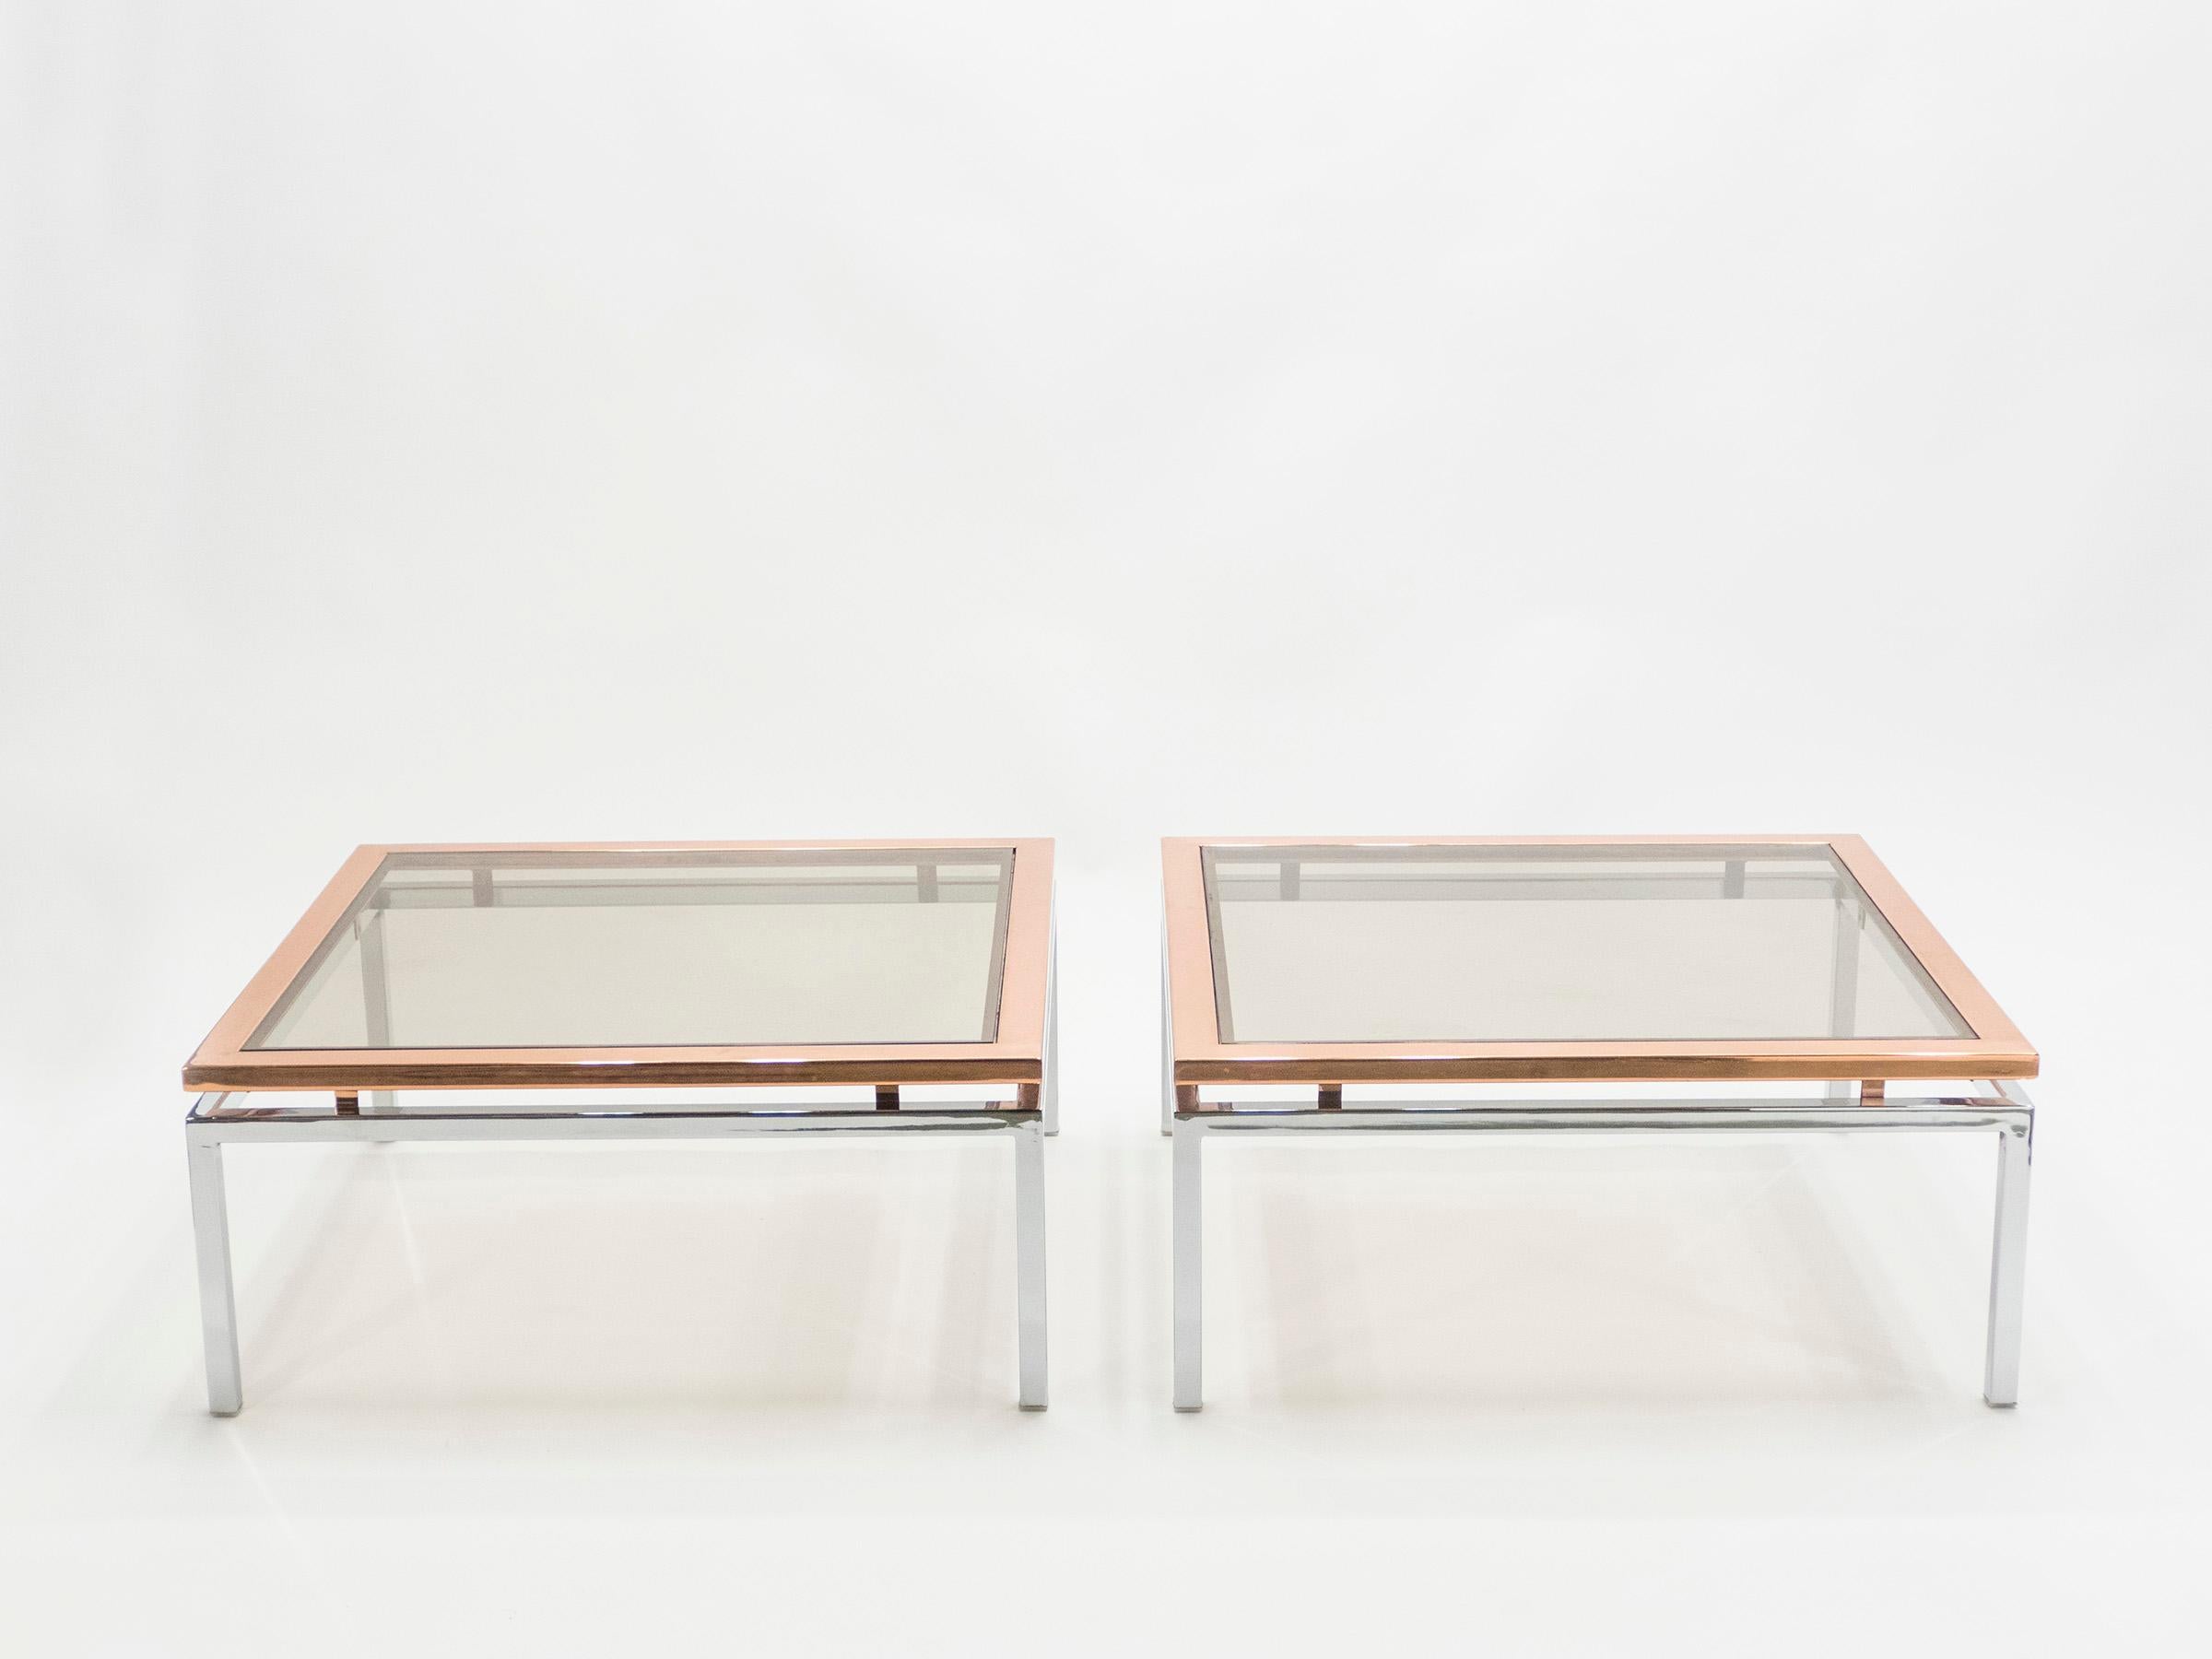 Late 20th Century Pair of Square Chrome Copper Coffee Tables Guy Lefevre for Maison Jansen, 1970s